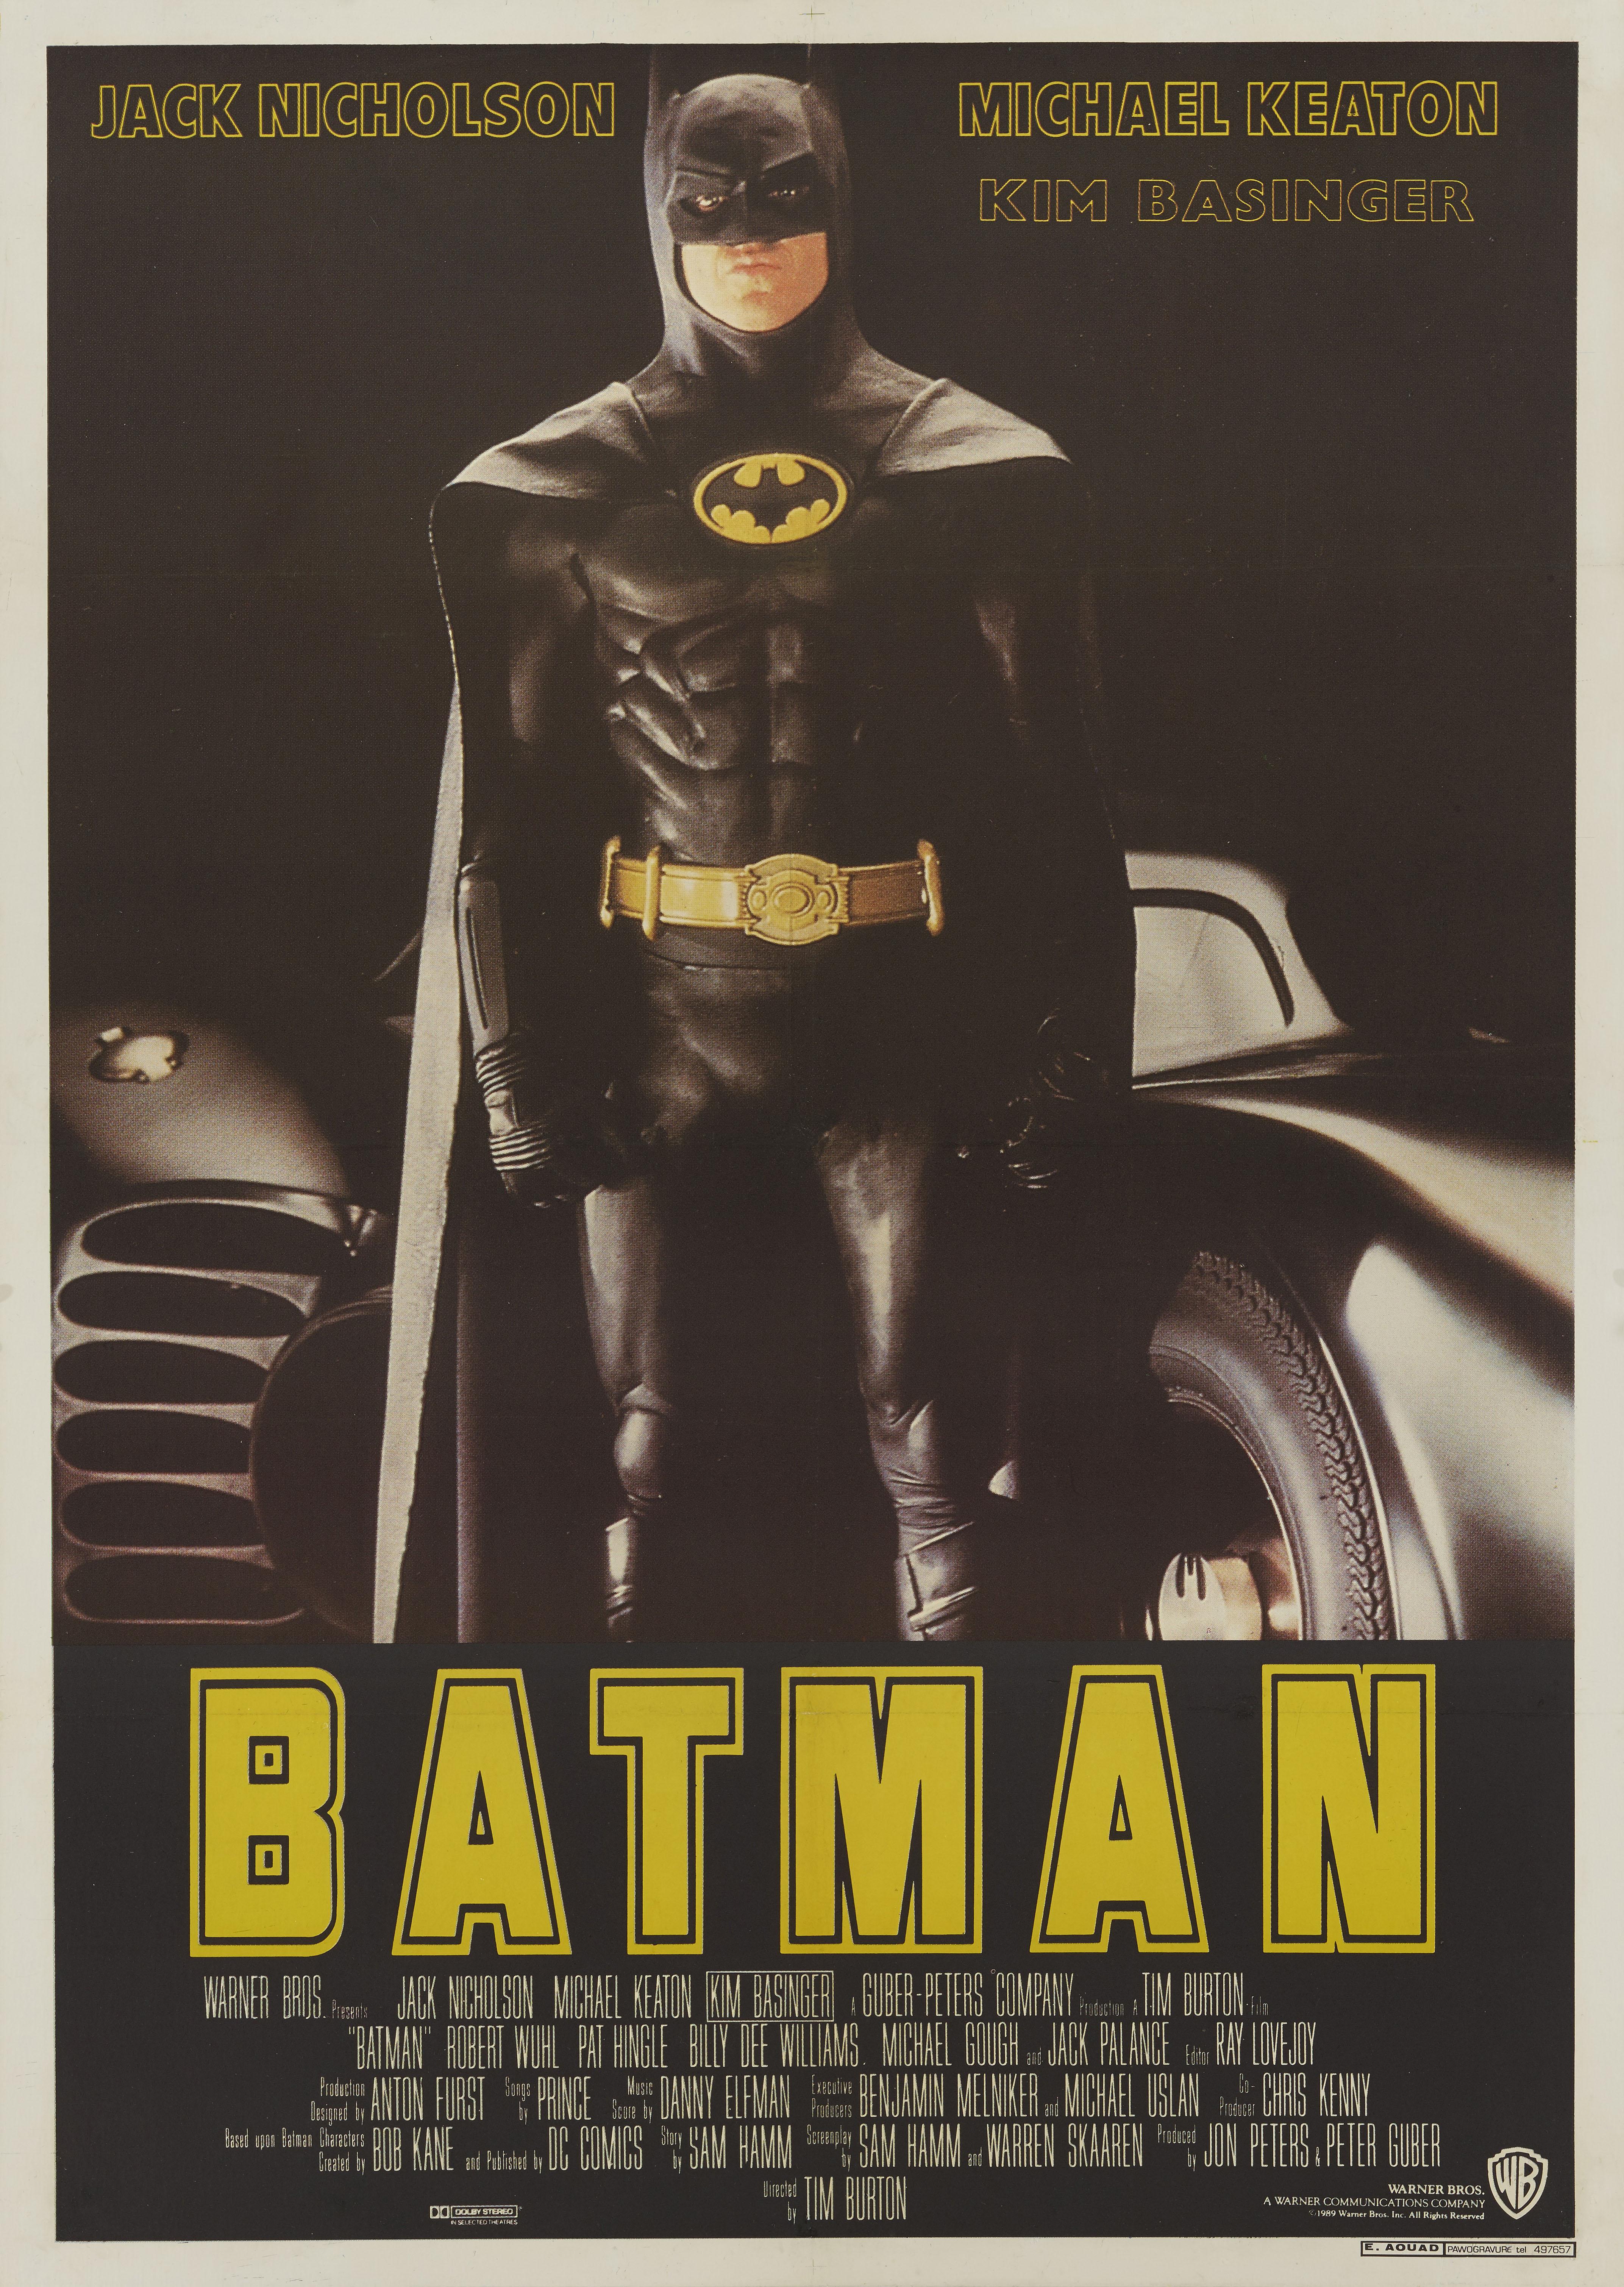 Original Lebanese film poster for Tim Burton's 1989 Batman staring Jack Nicholson, Michael Keaton and Kim Basinger. The artwork on this poster is very differeant to the US poster that only features the Bat Logo.
This poster is conservation linen